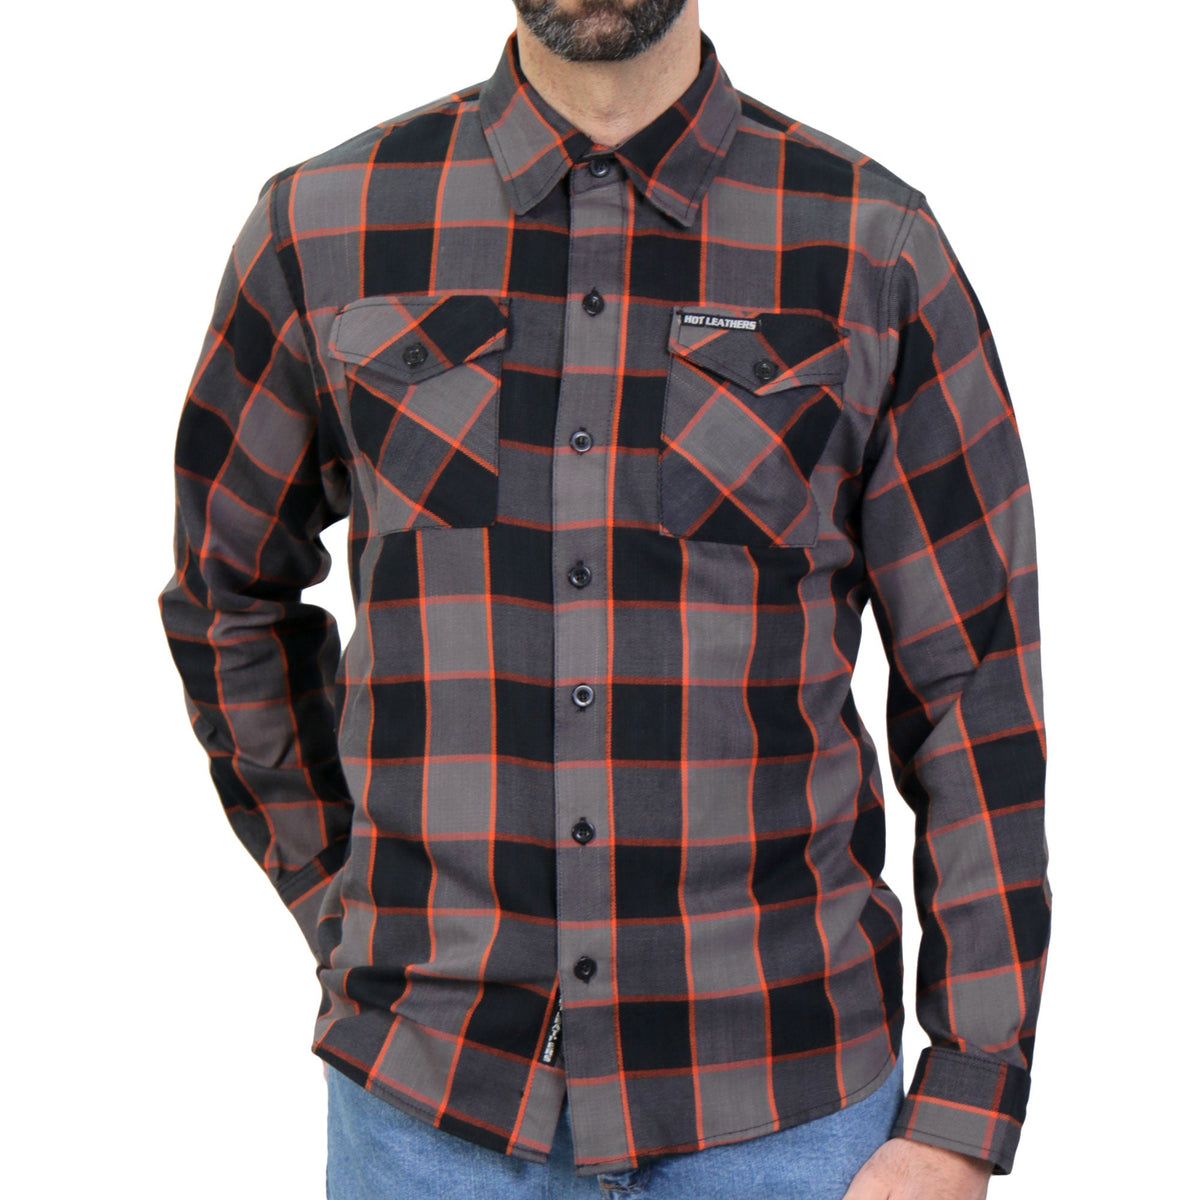 Hot Leathers FLM2020 Men's 'Black, Gray and Orange' Flannel Long Sleeve Shirt